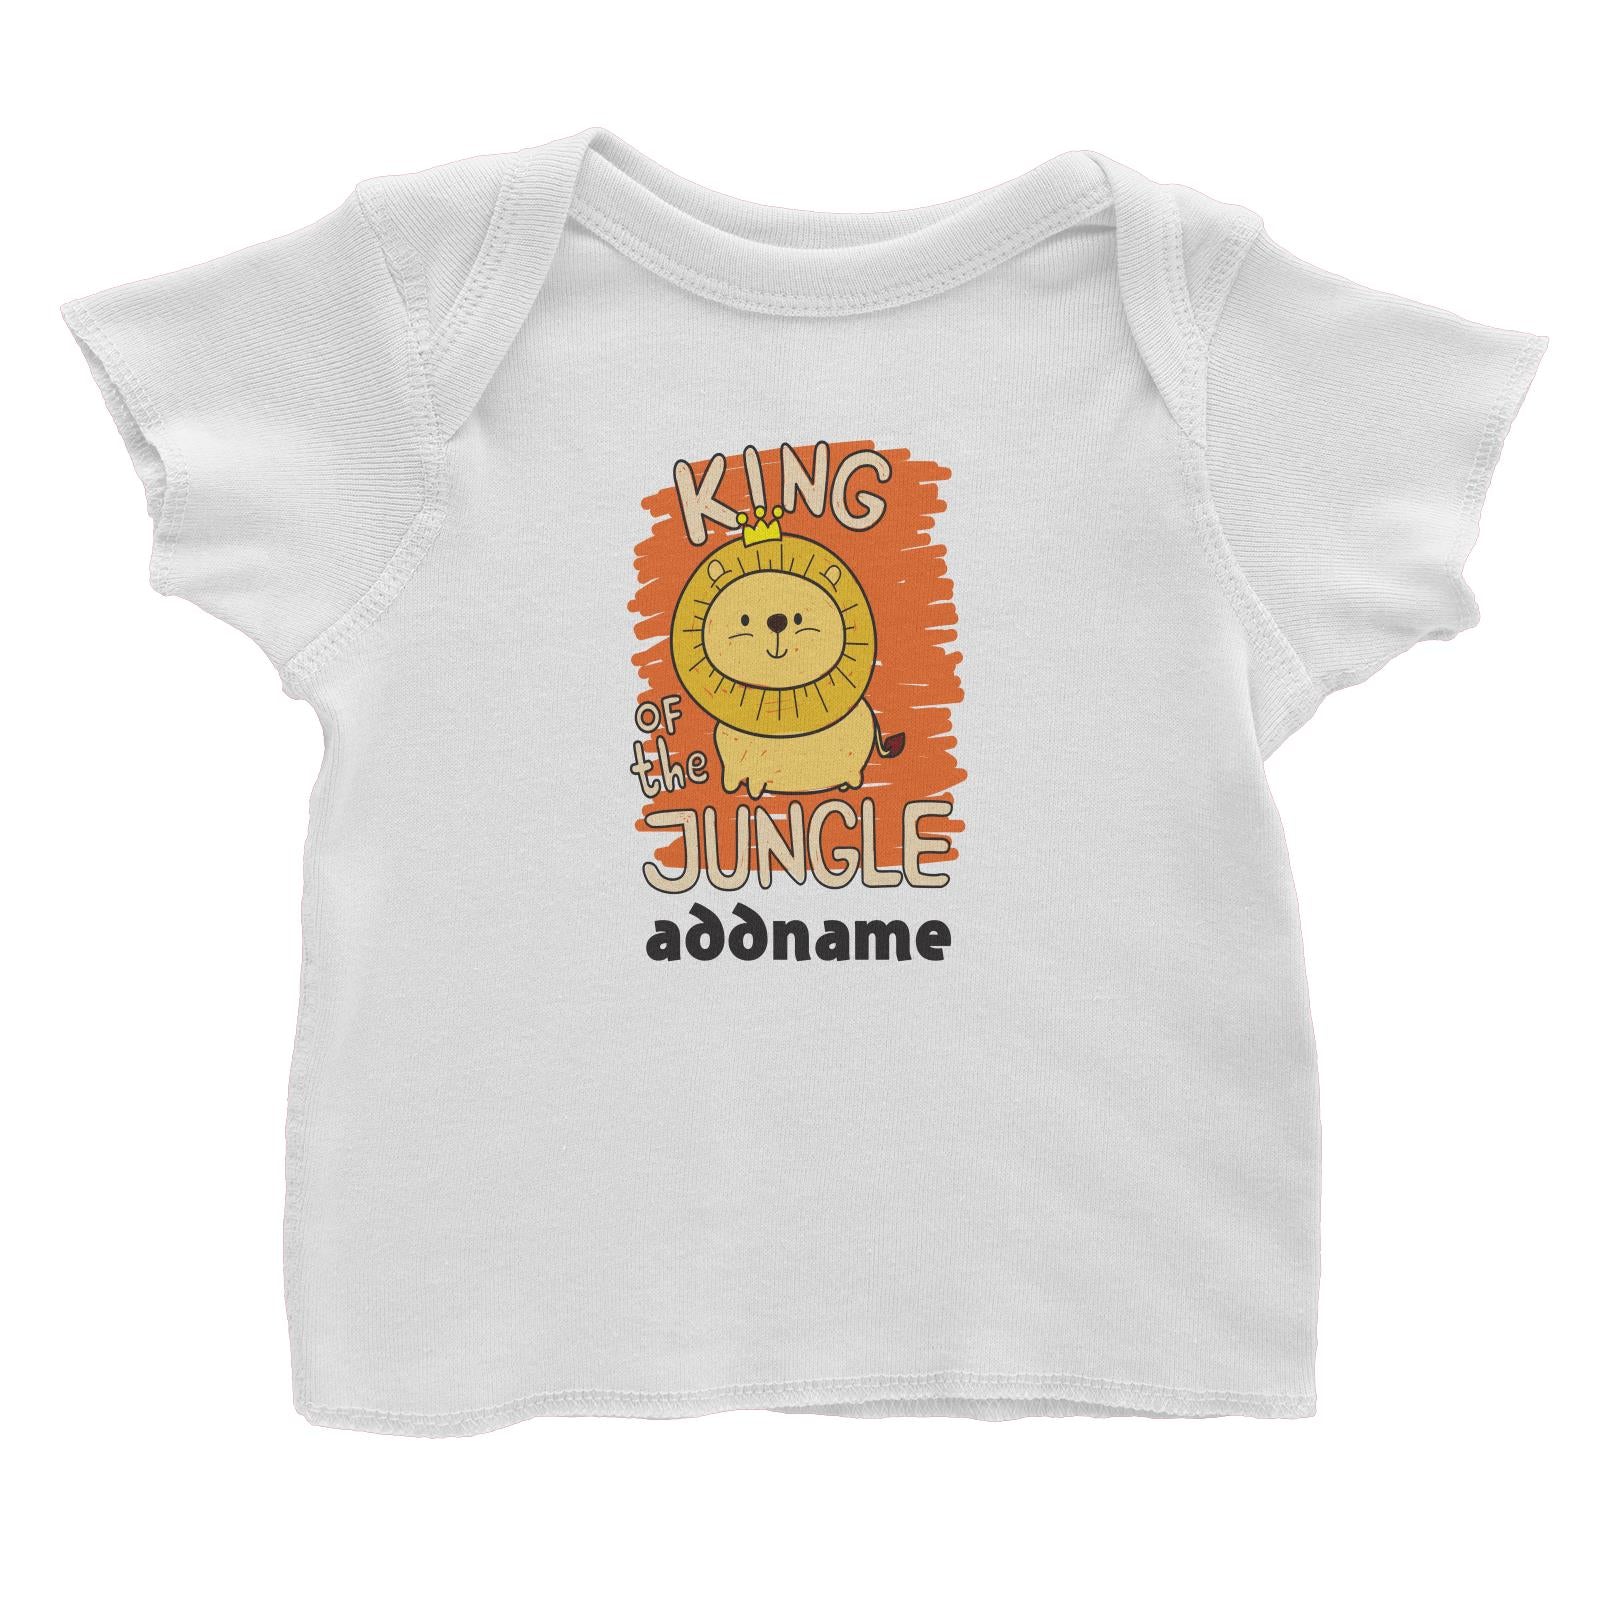 Cool Cute Animals Lion King Of The Jungle Addname Baby T-Shirt